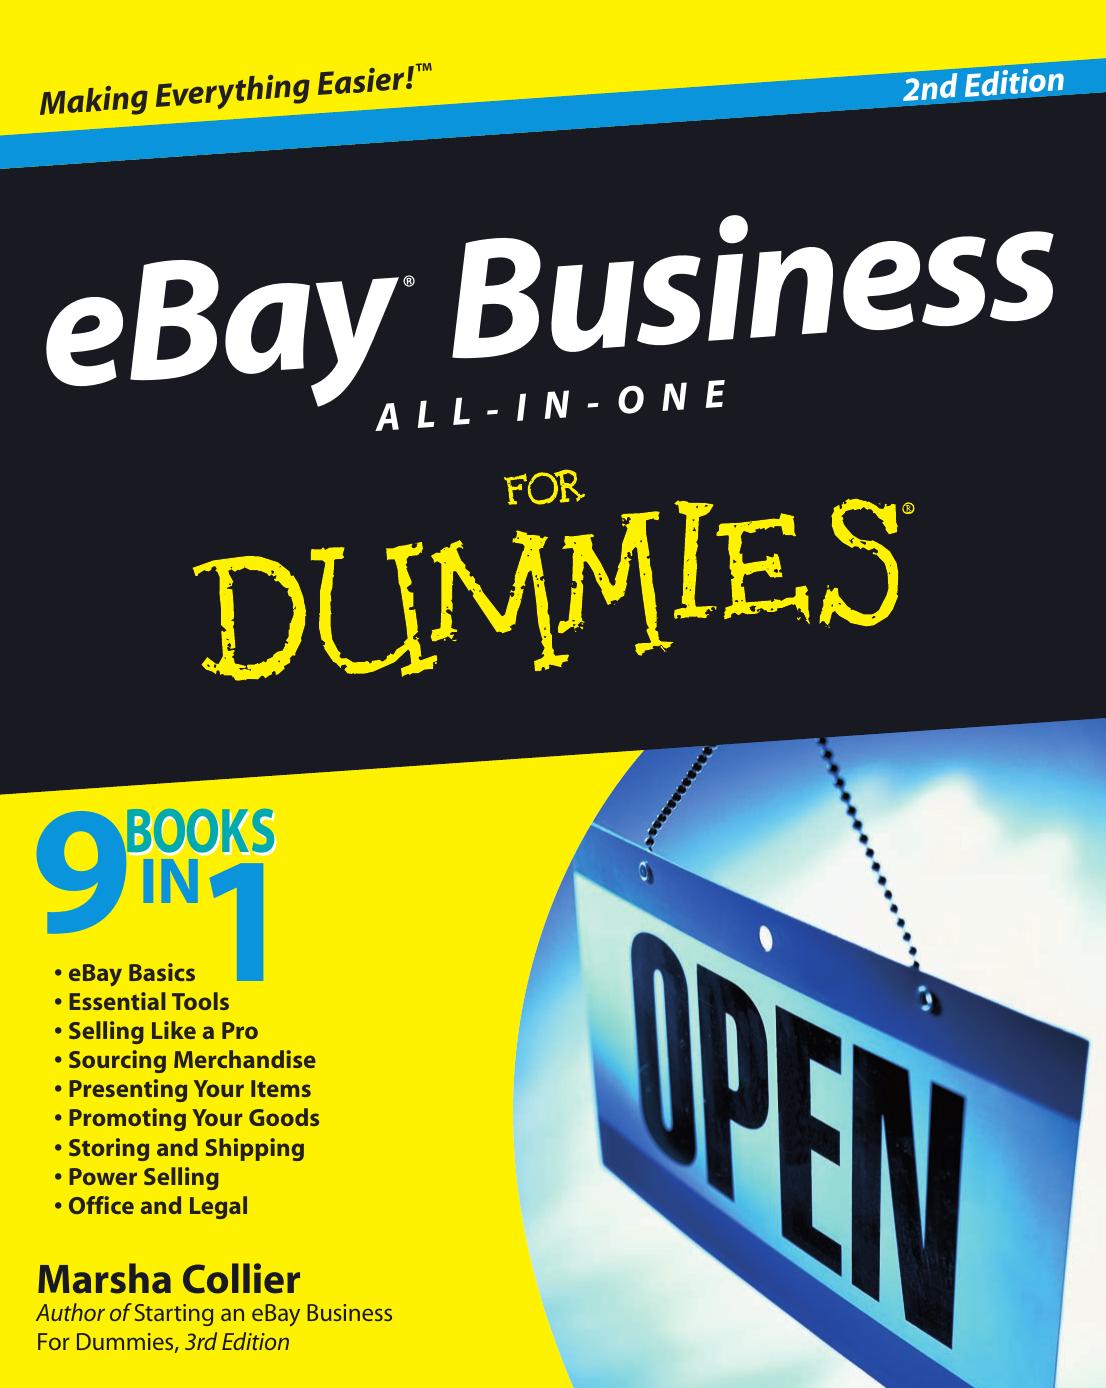 eBay Business All-in-One For Dummies by Marsha Collier